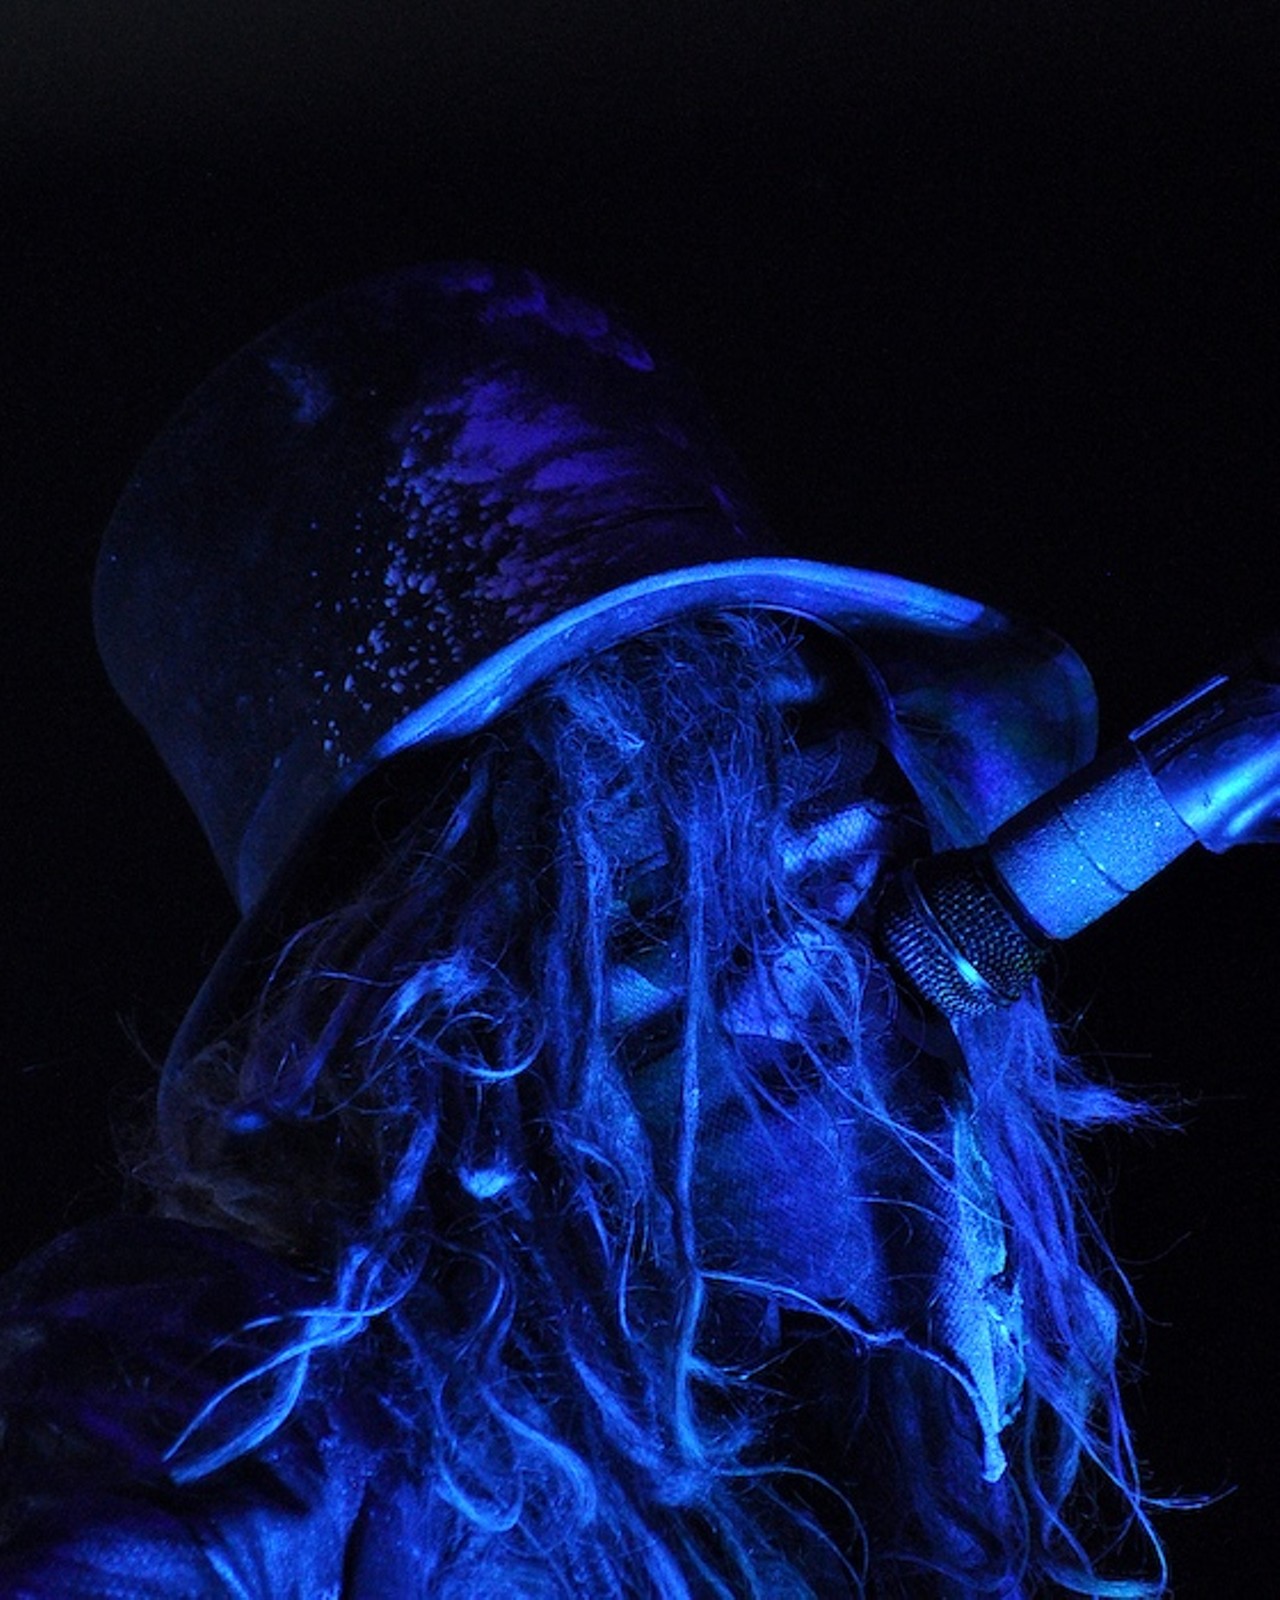 Rob Zombie at the Covelli Centre in Youngstown